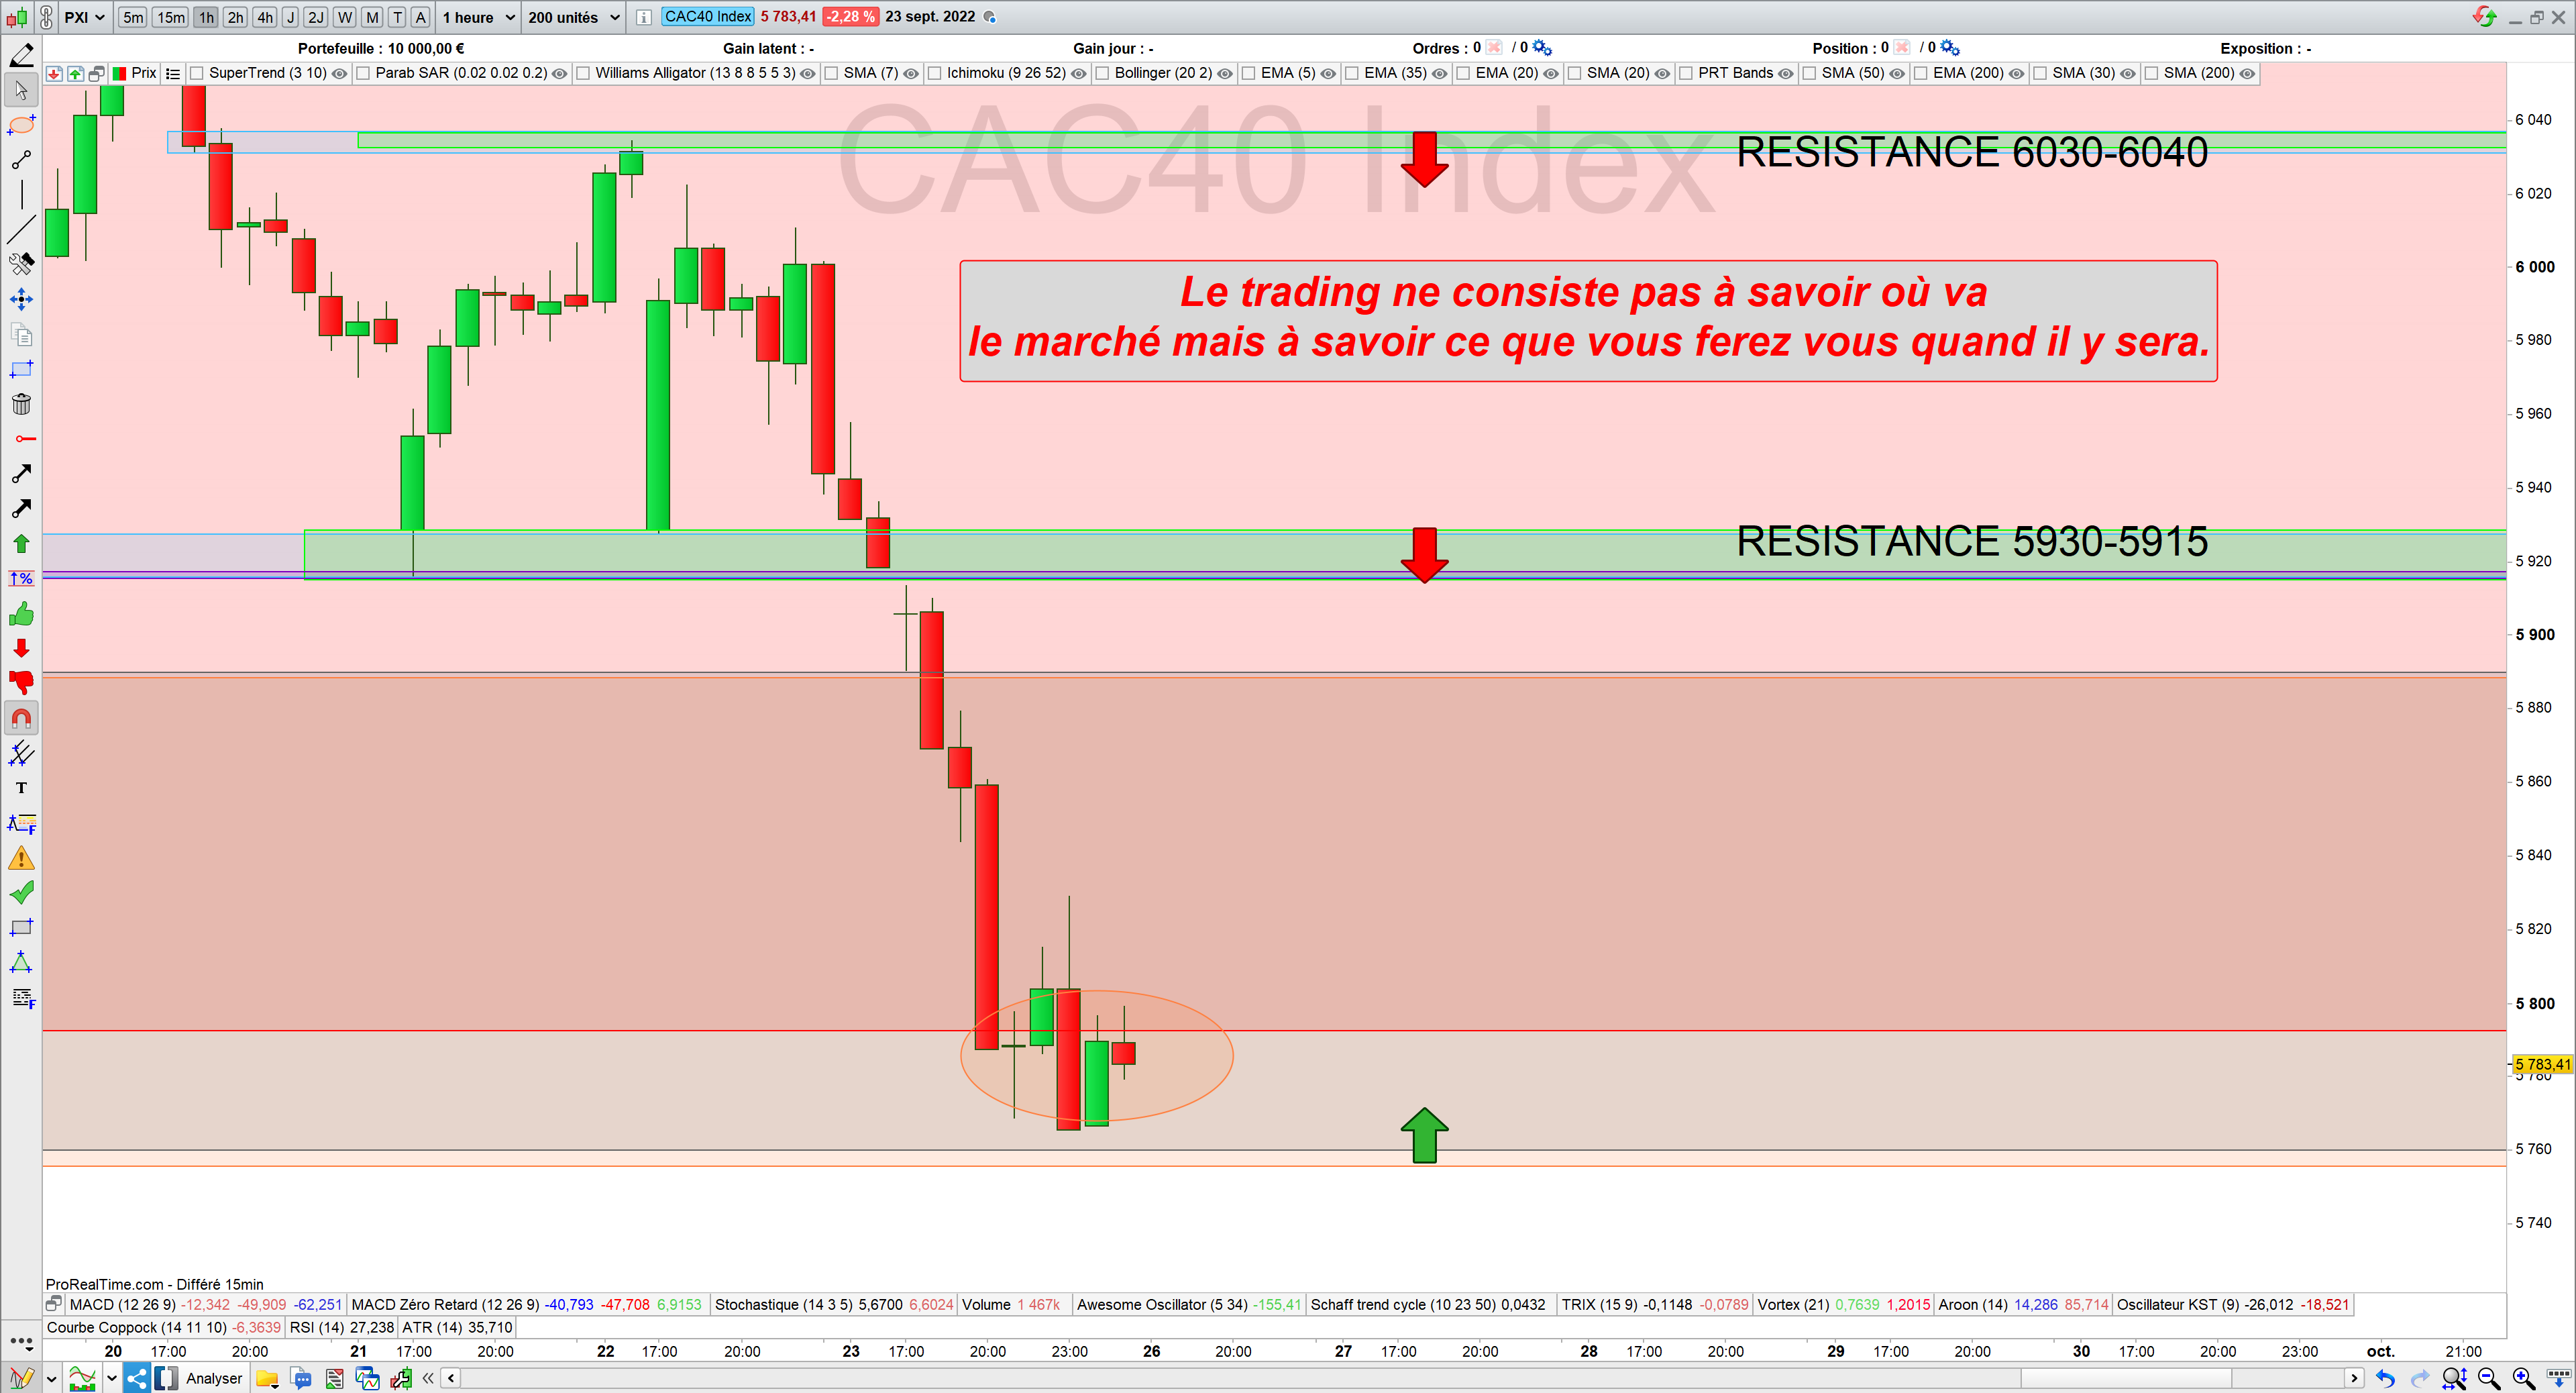 Trading cac40 26/09/22